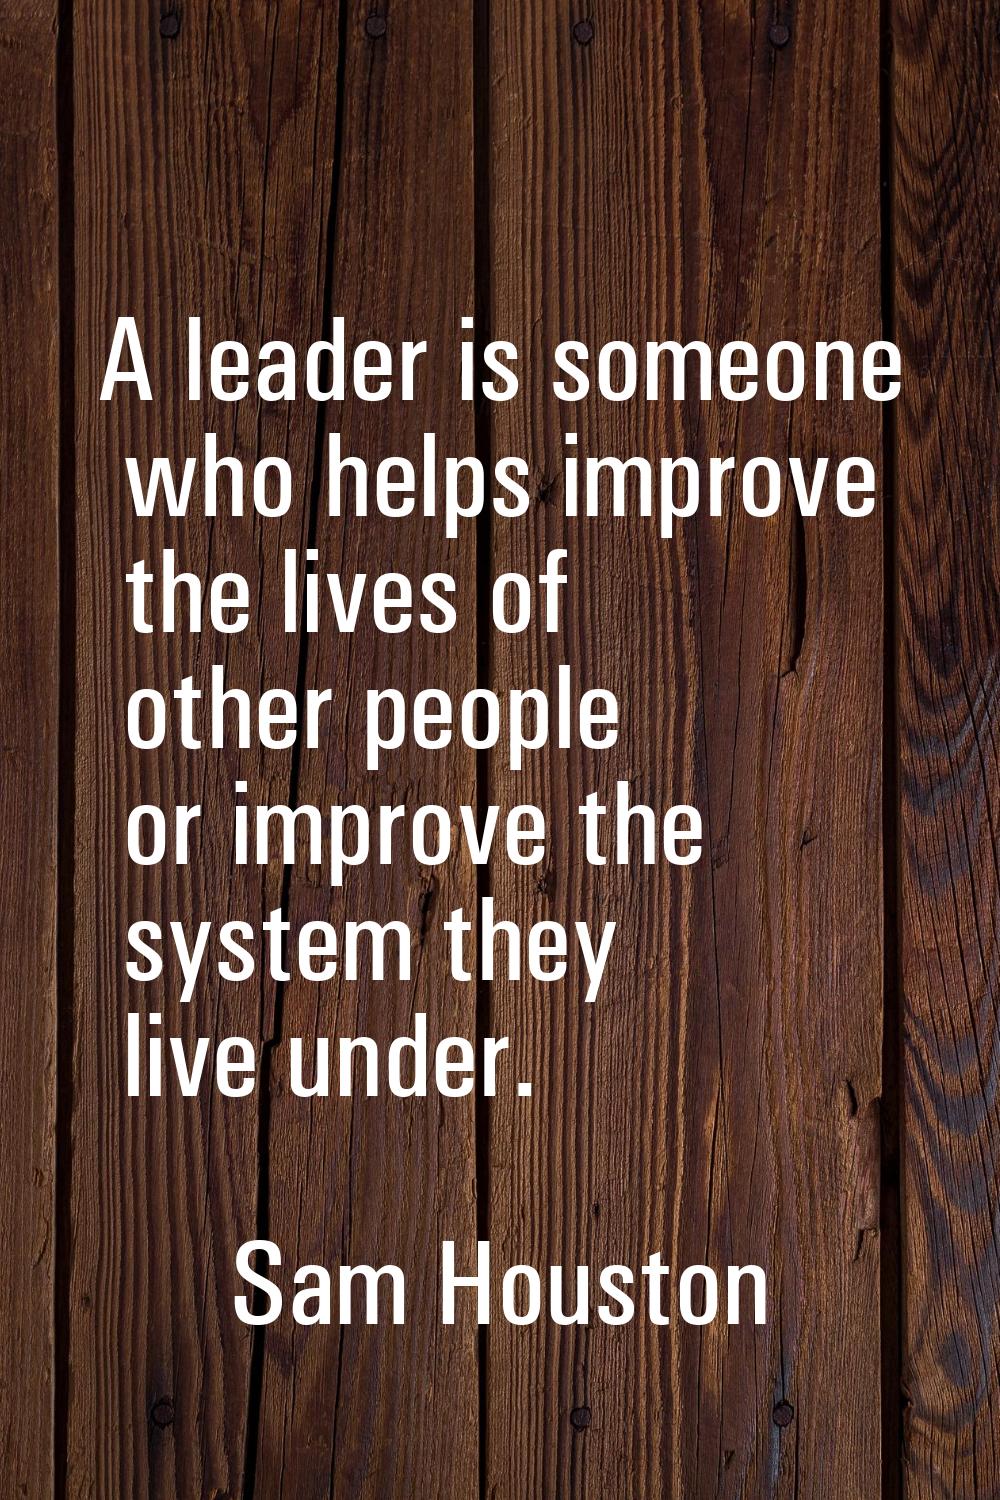 A leader is someone who helps improve the lives of other people or improve the system they live und